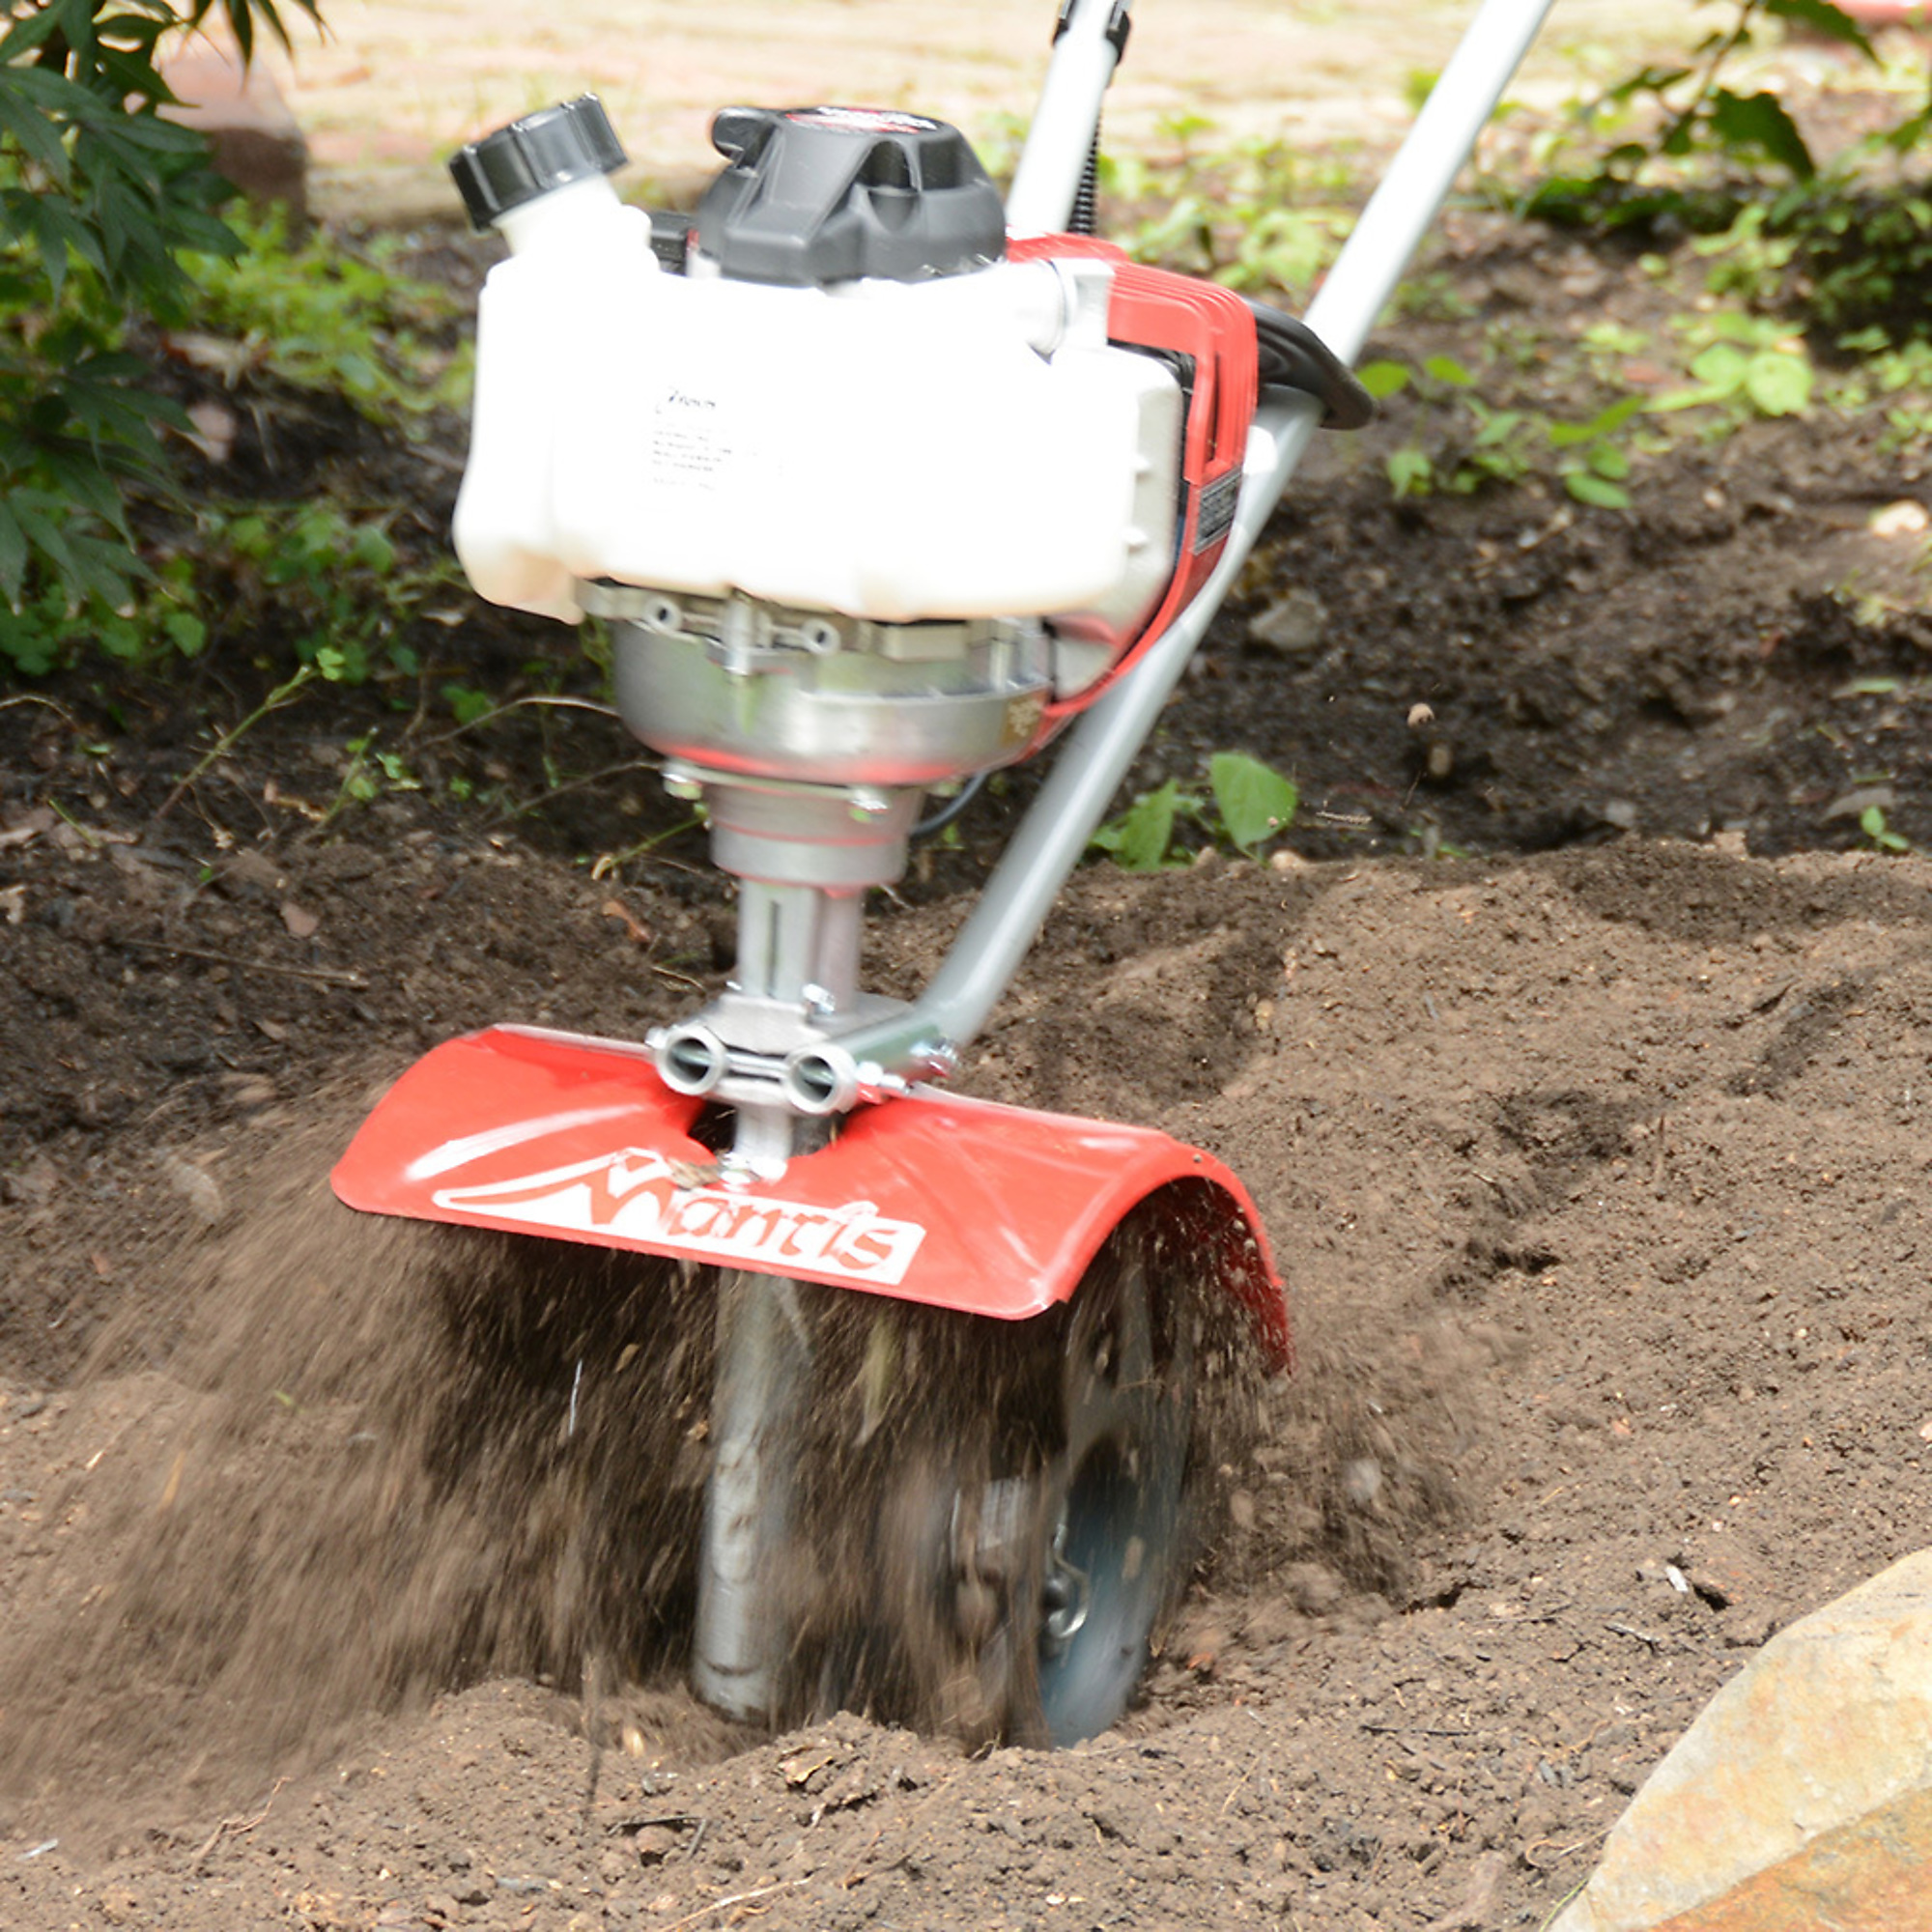 Mantis, 4-Cycle Tiller/Cultivator || Honda GX25 engine, Max. Working Width 9 in, Engine Displacement 25 cc, Model 7268